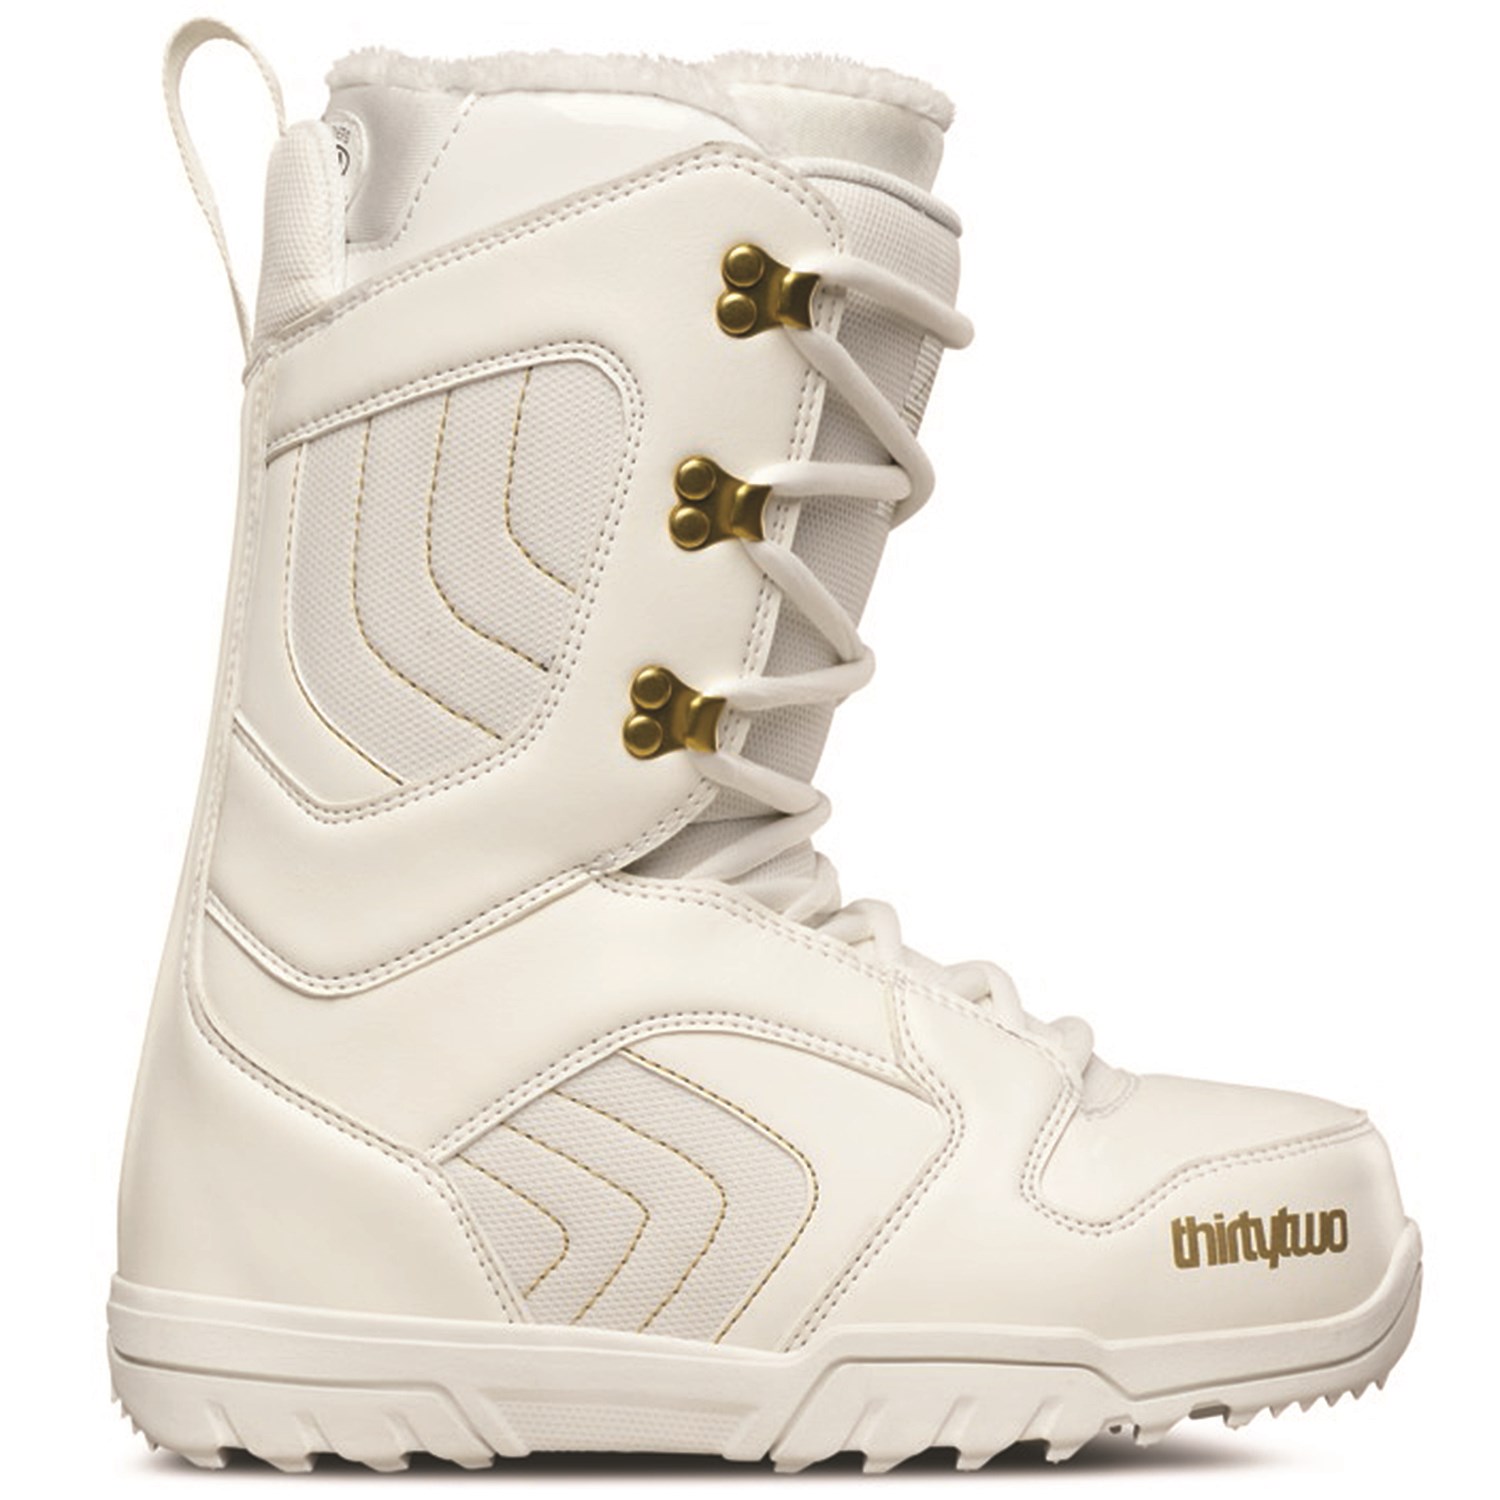 thirtytwo Exit Snowboard Boots - Women 